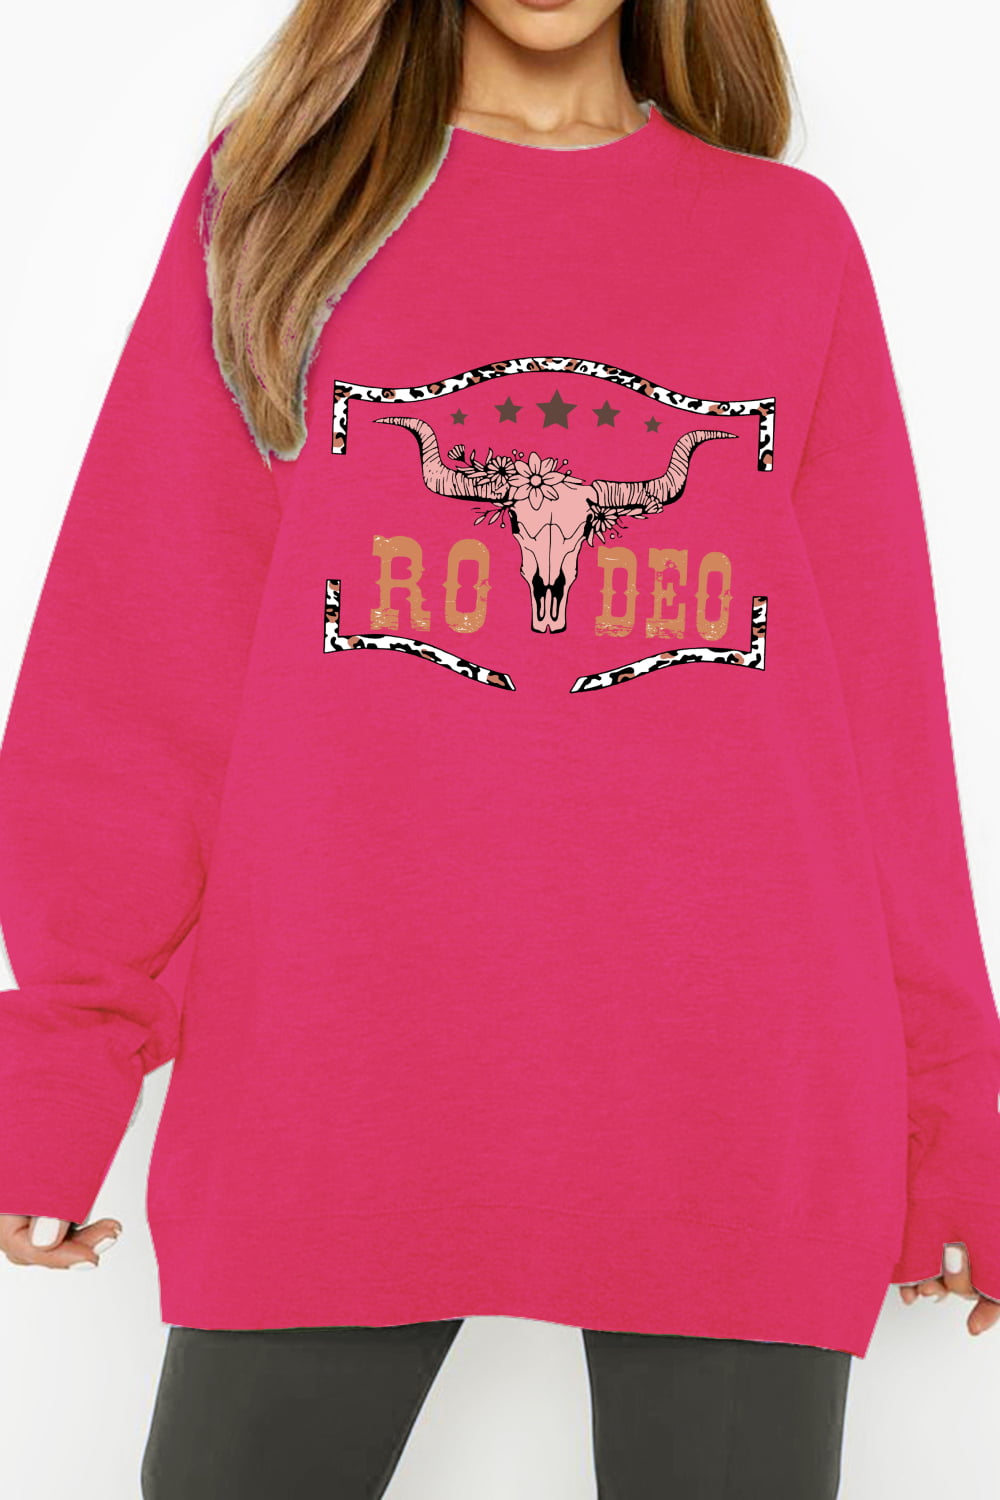 Malibu Dreams Simply Love Full Size Round Neck Dropped Shoulder RODEO Graphic Sweatshirt